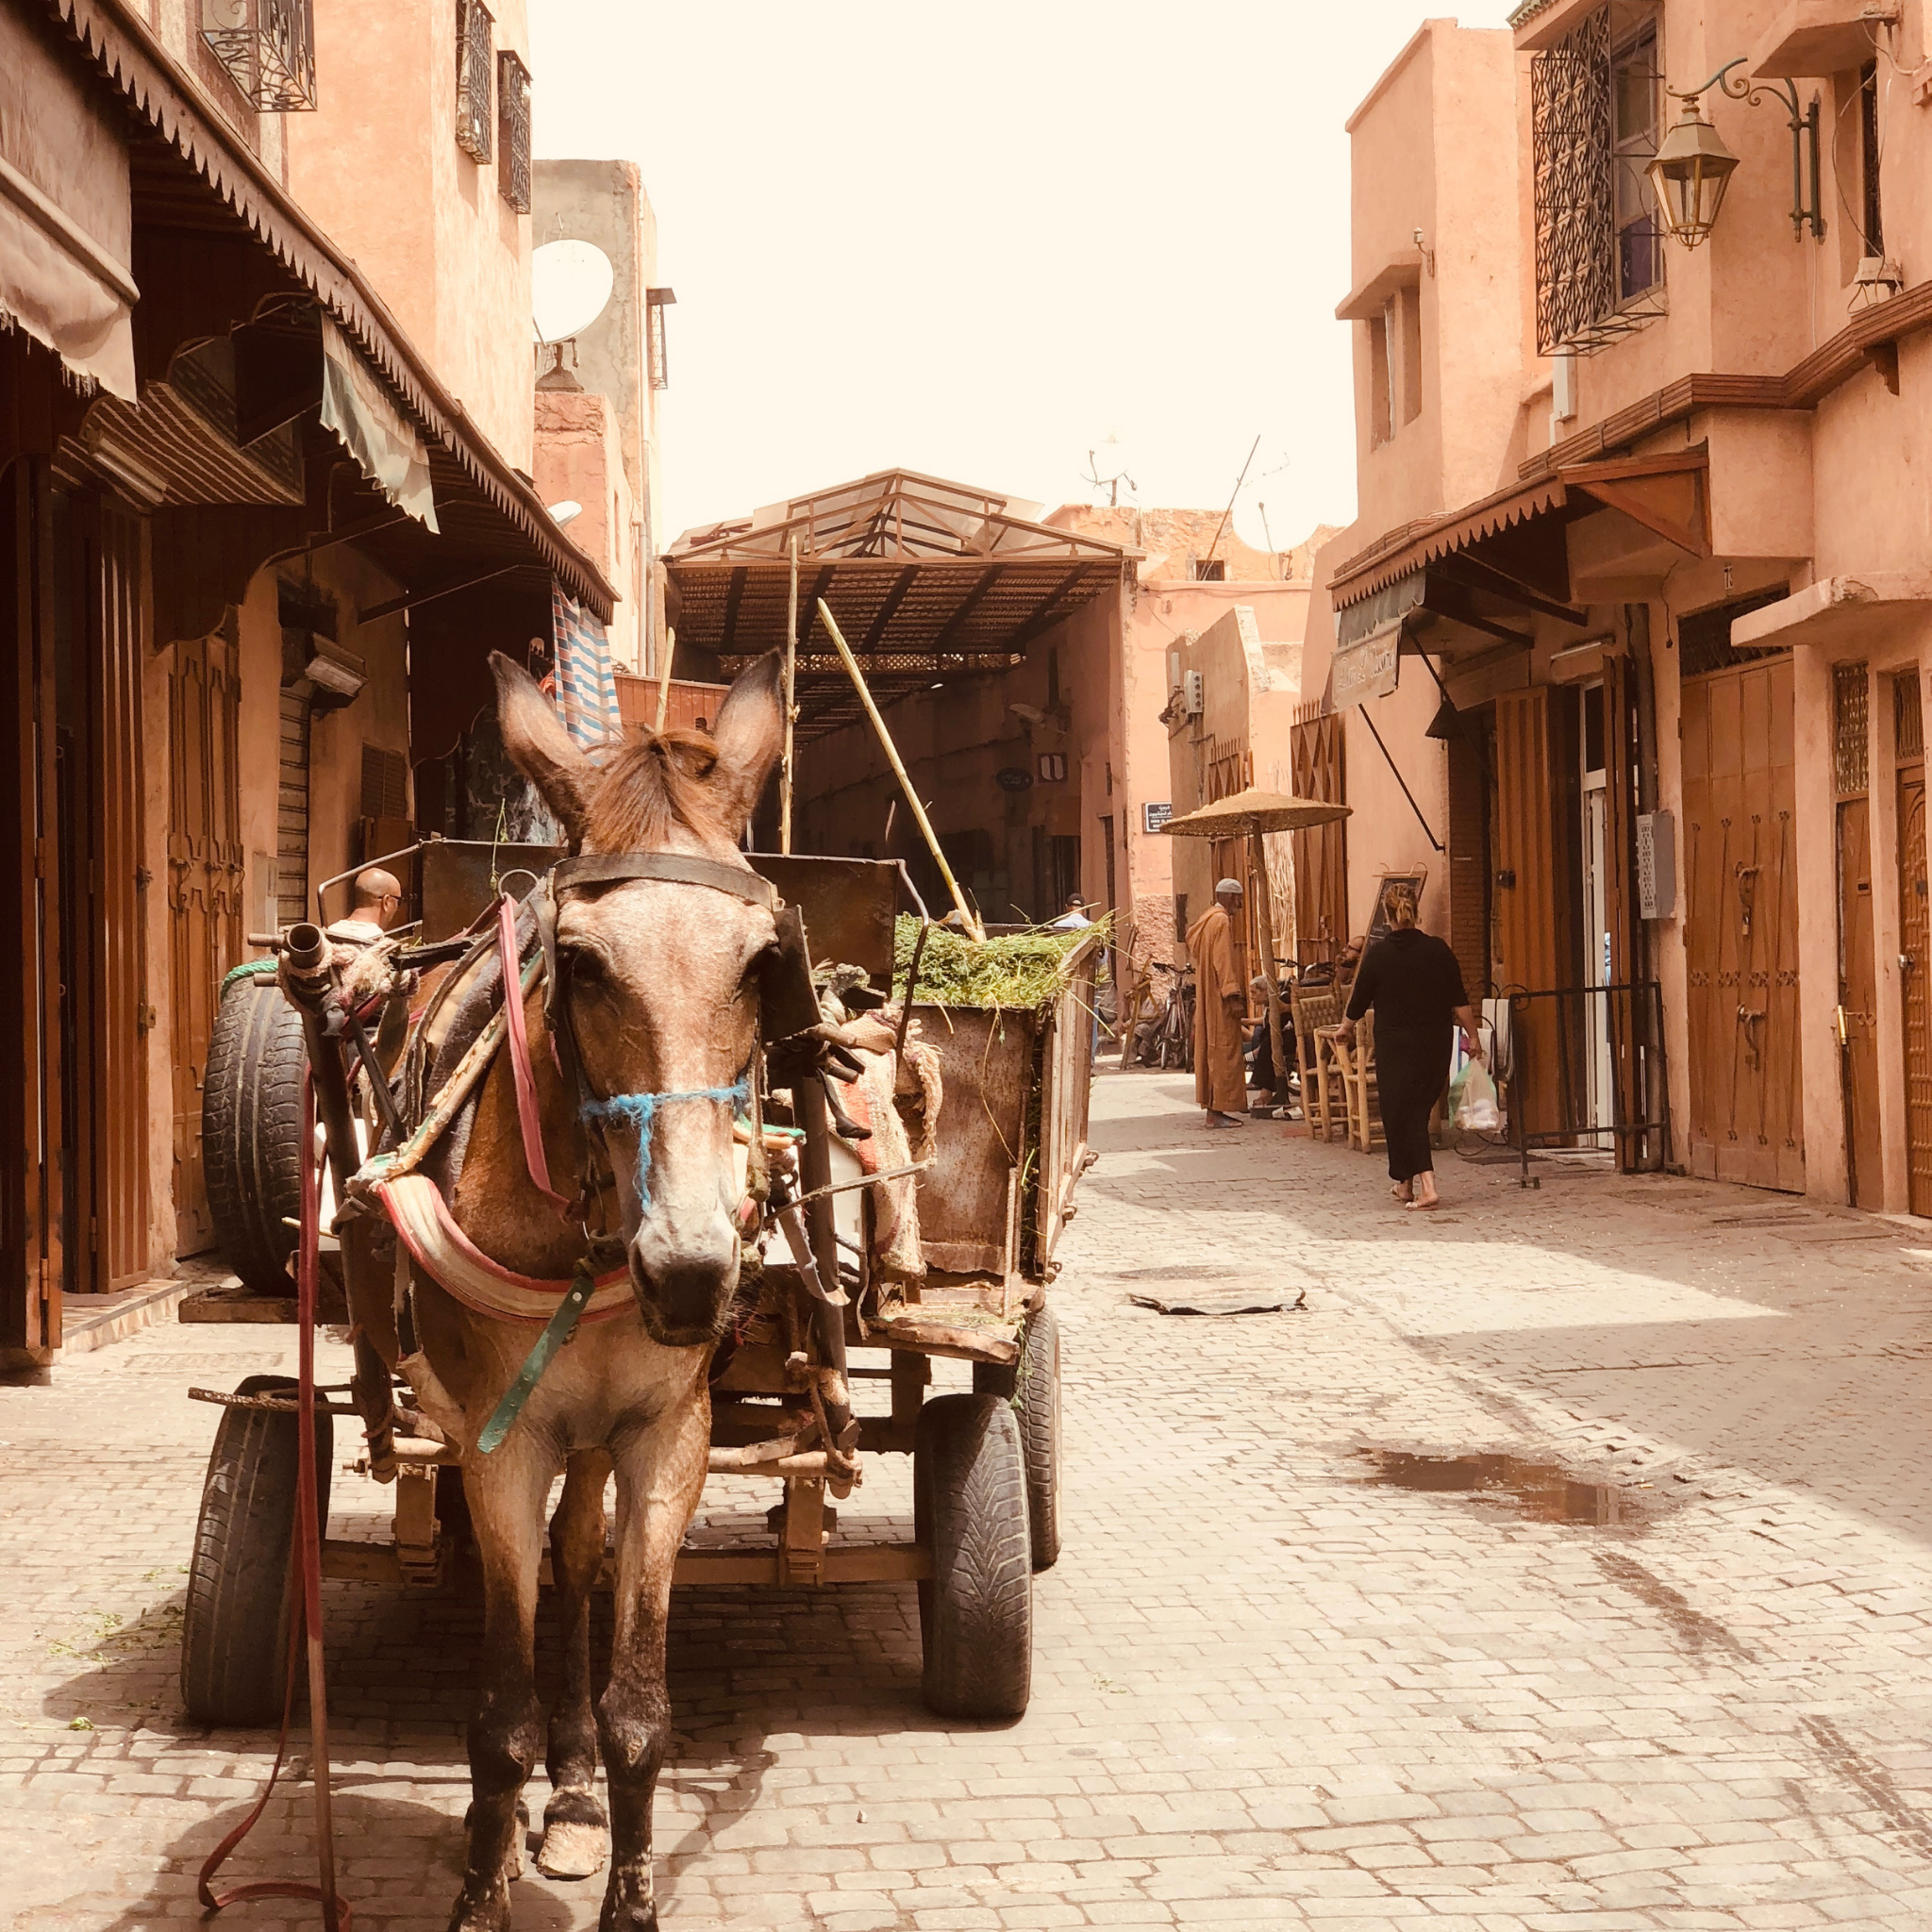 A donkey in the Streets of Marrakech Morocco Medina